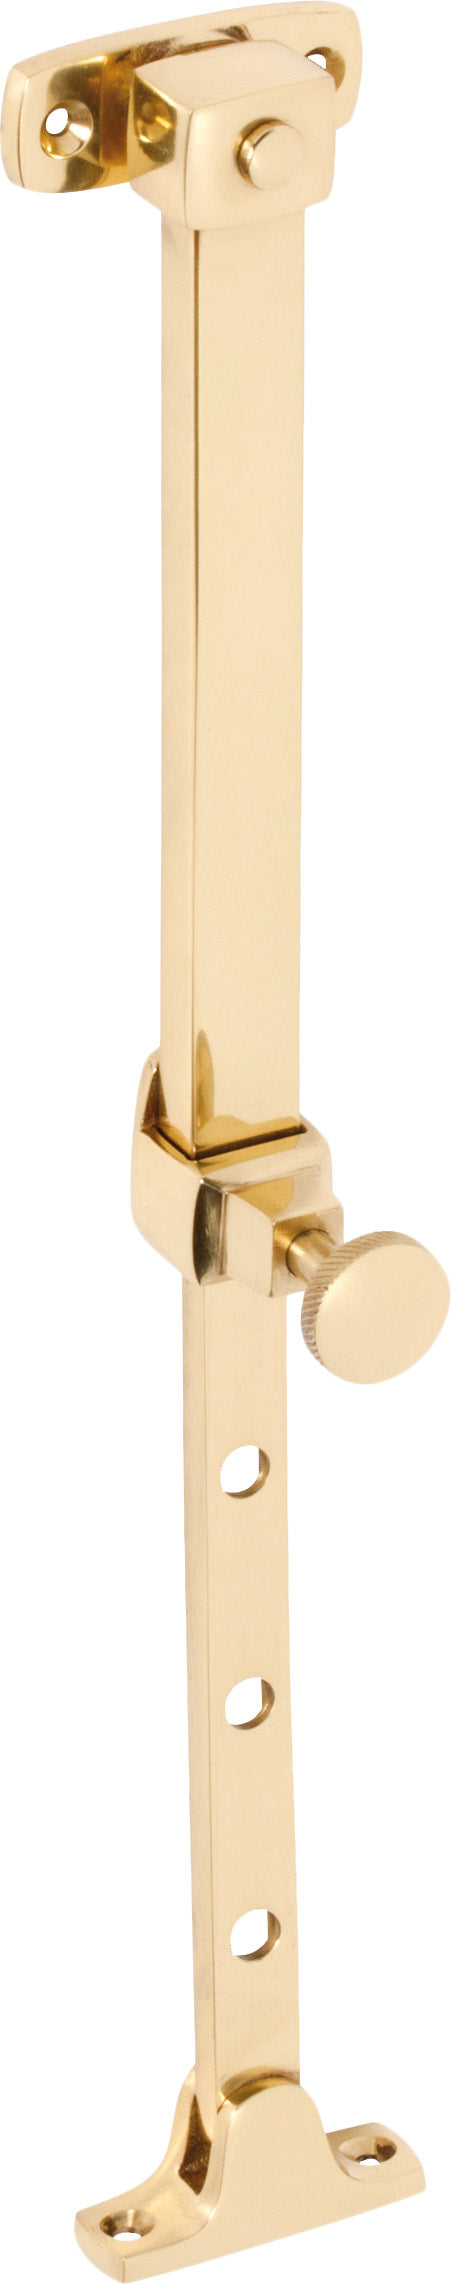 Casement Stay Telescopic Pin Unlacquered Polished Brass L200-295mm